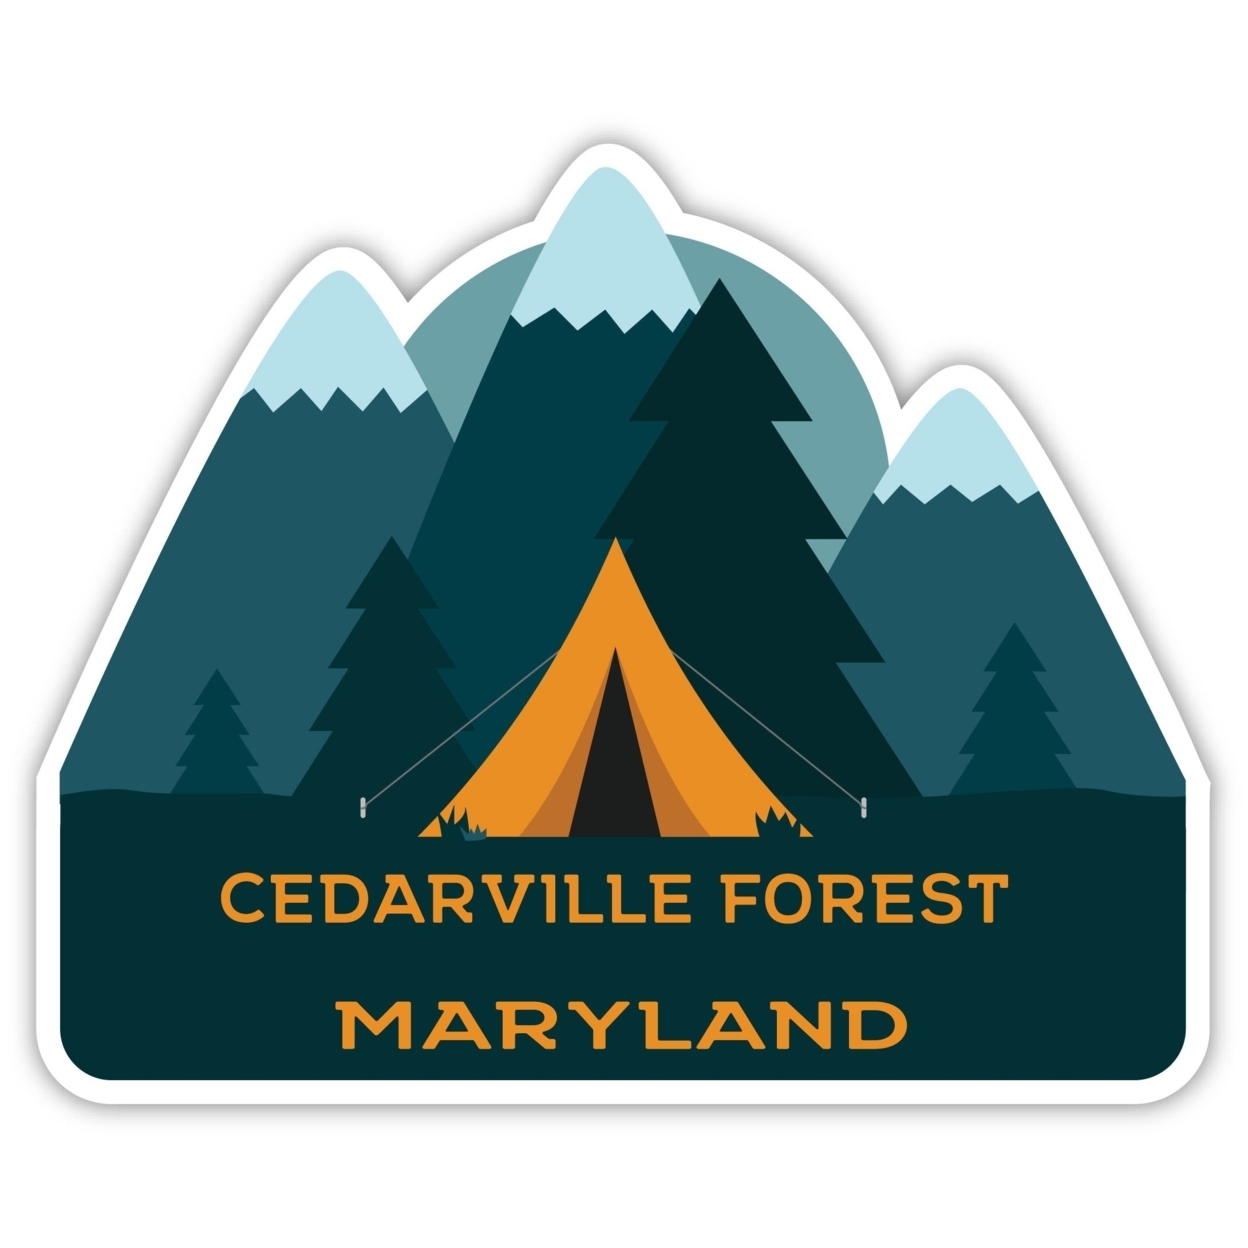 Cedarville Forest Maryland Souvenir Decorative Stickers (Choose Theme And Size) - Single Unit, 10-Inch, Tent